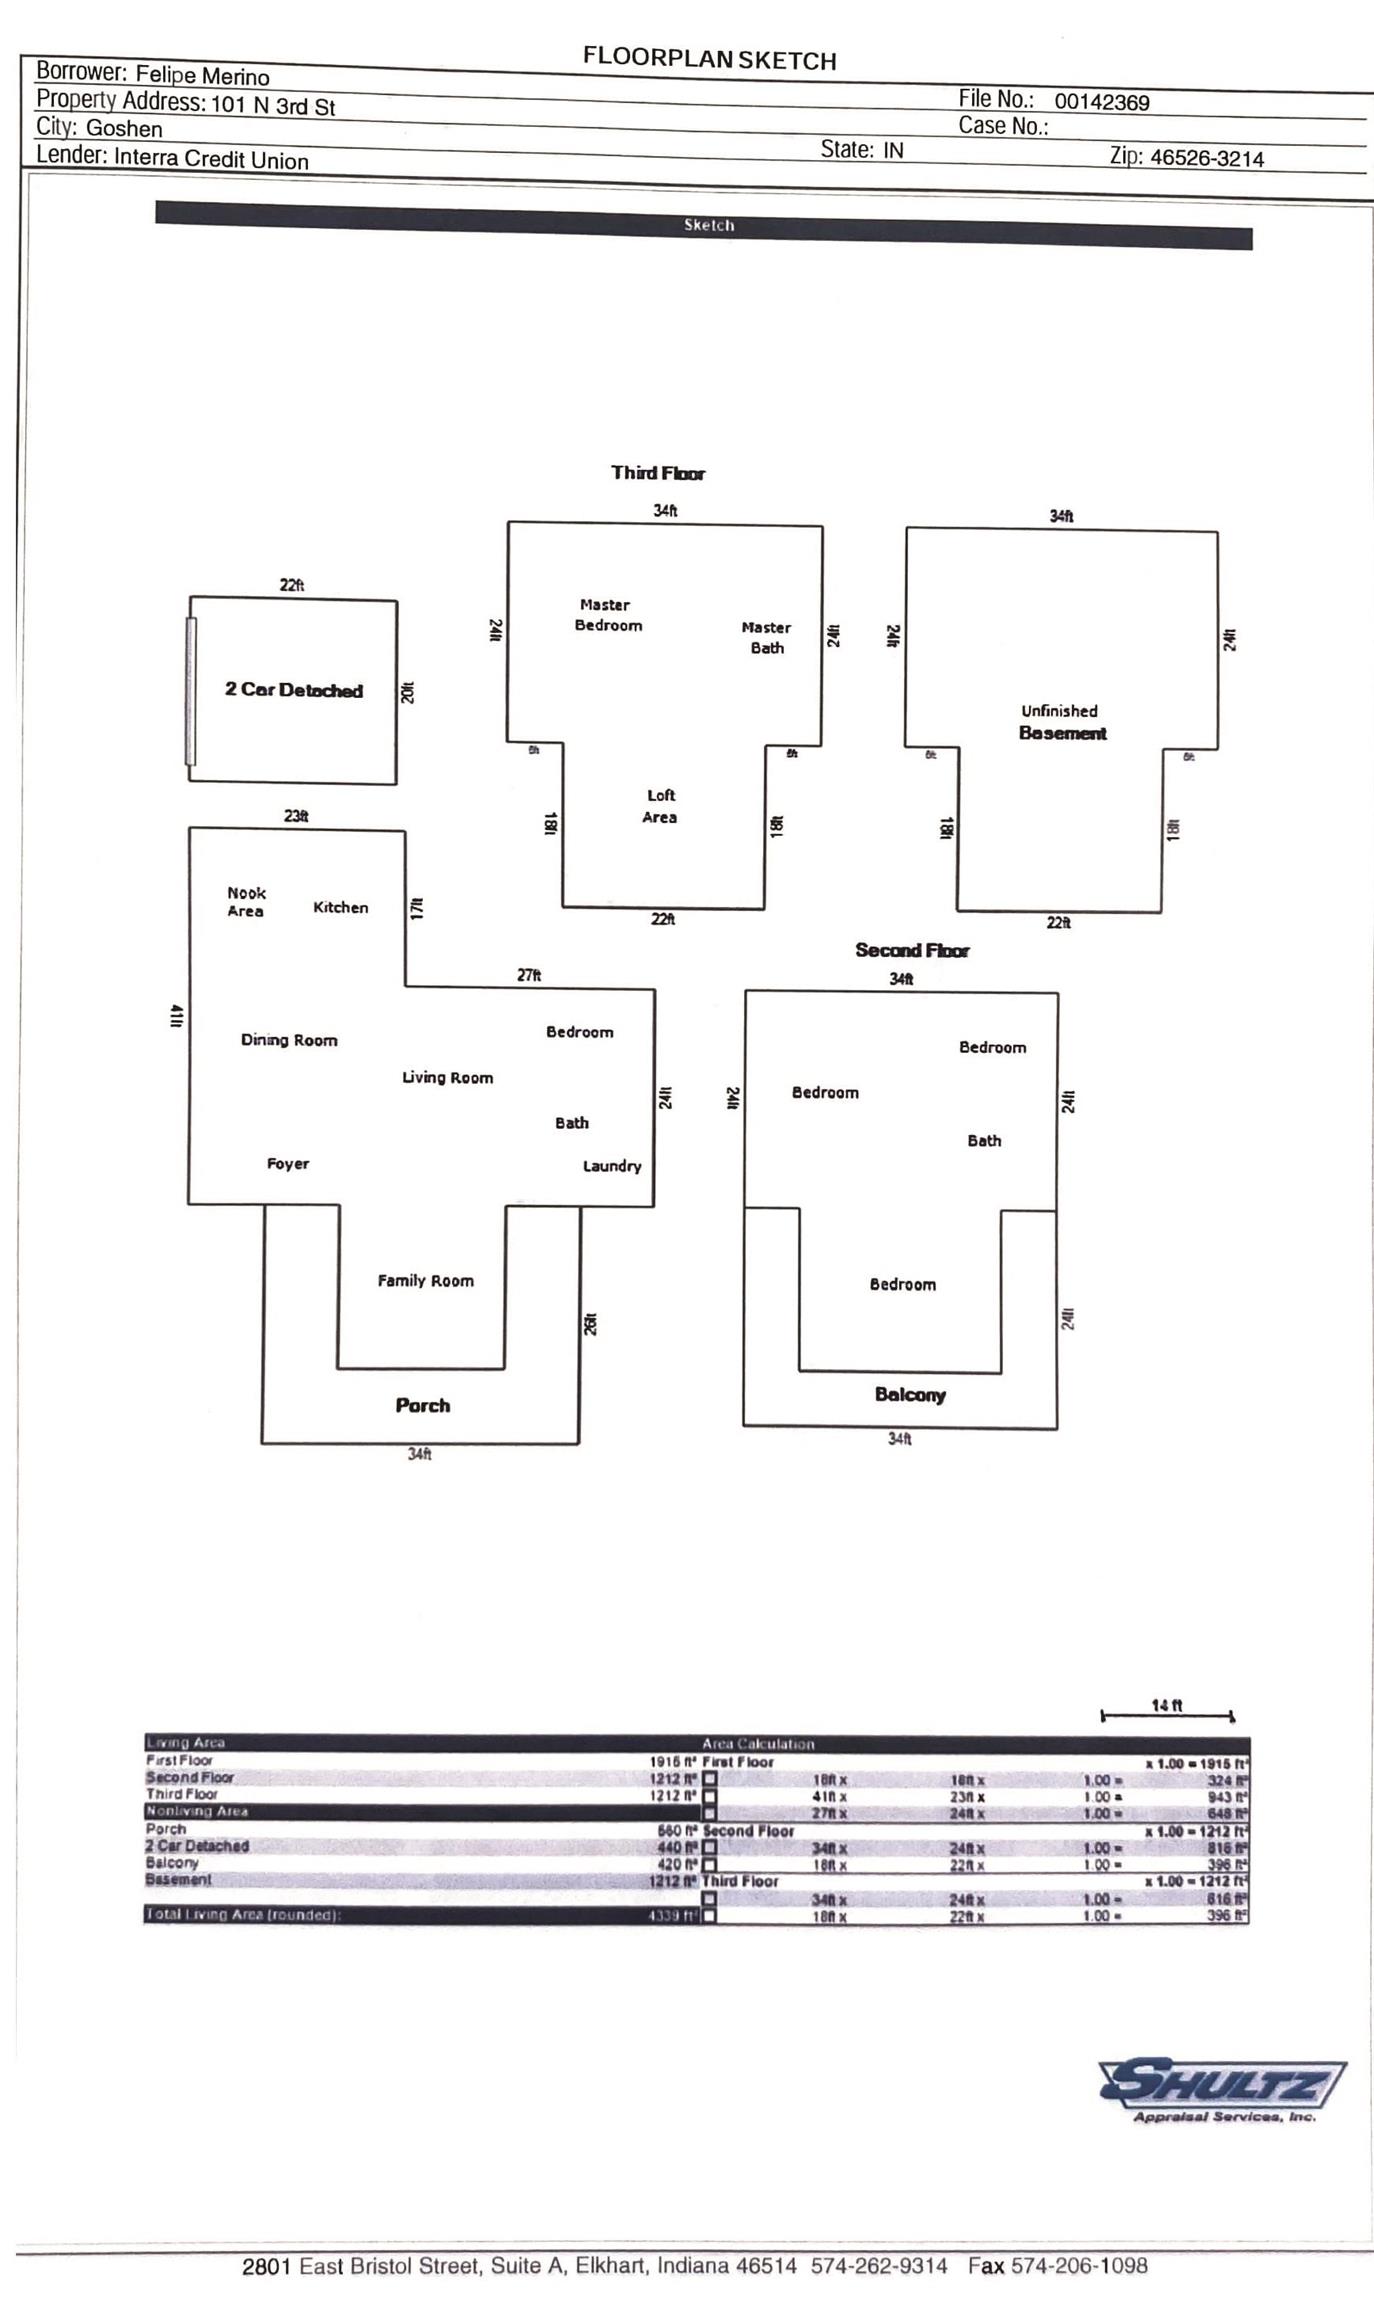 Updated Floor plan including accurate finished square footage after remodel.